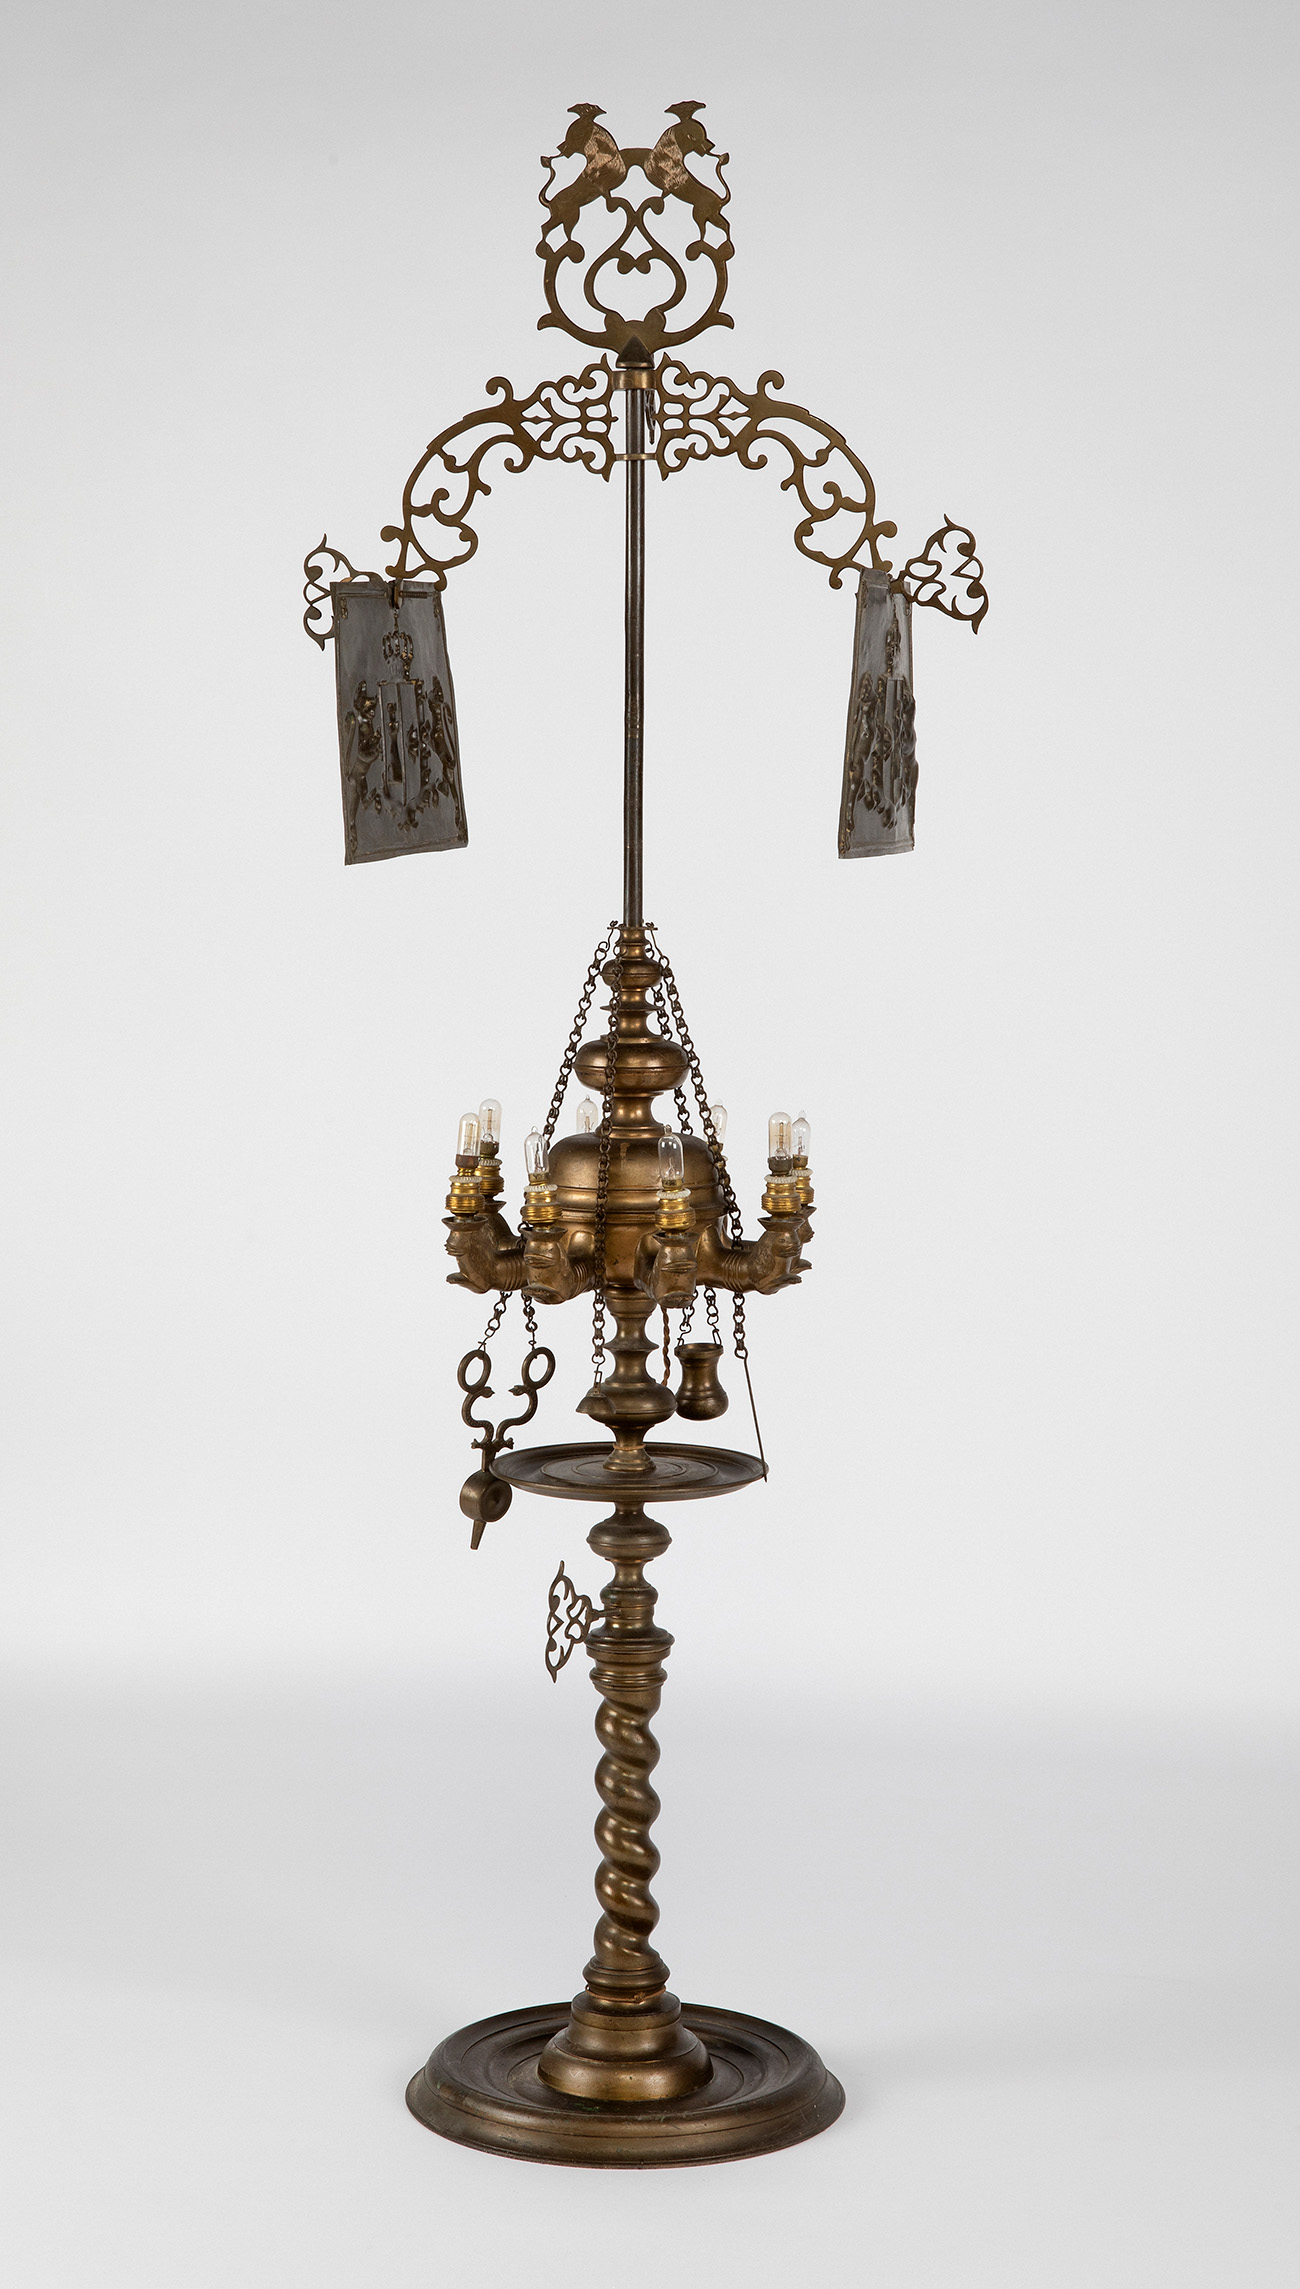 19th century oil lamp.Bronze.Later electrified. Preserves all the bulbs.Measurements: 146 x 50 x